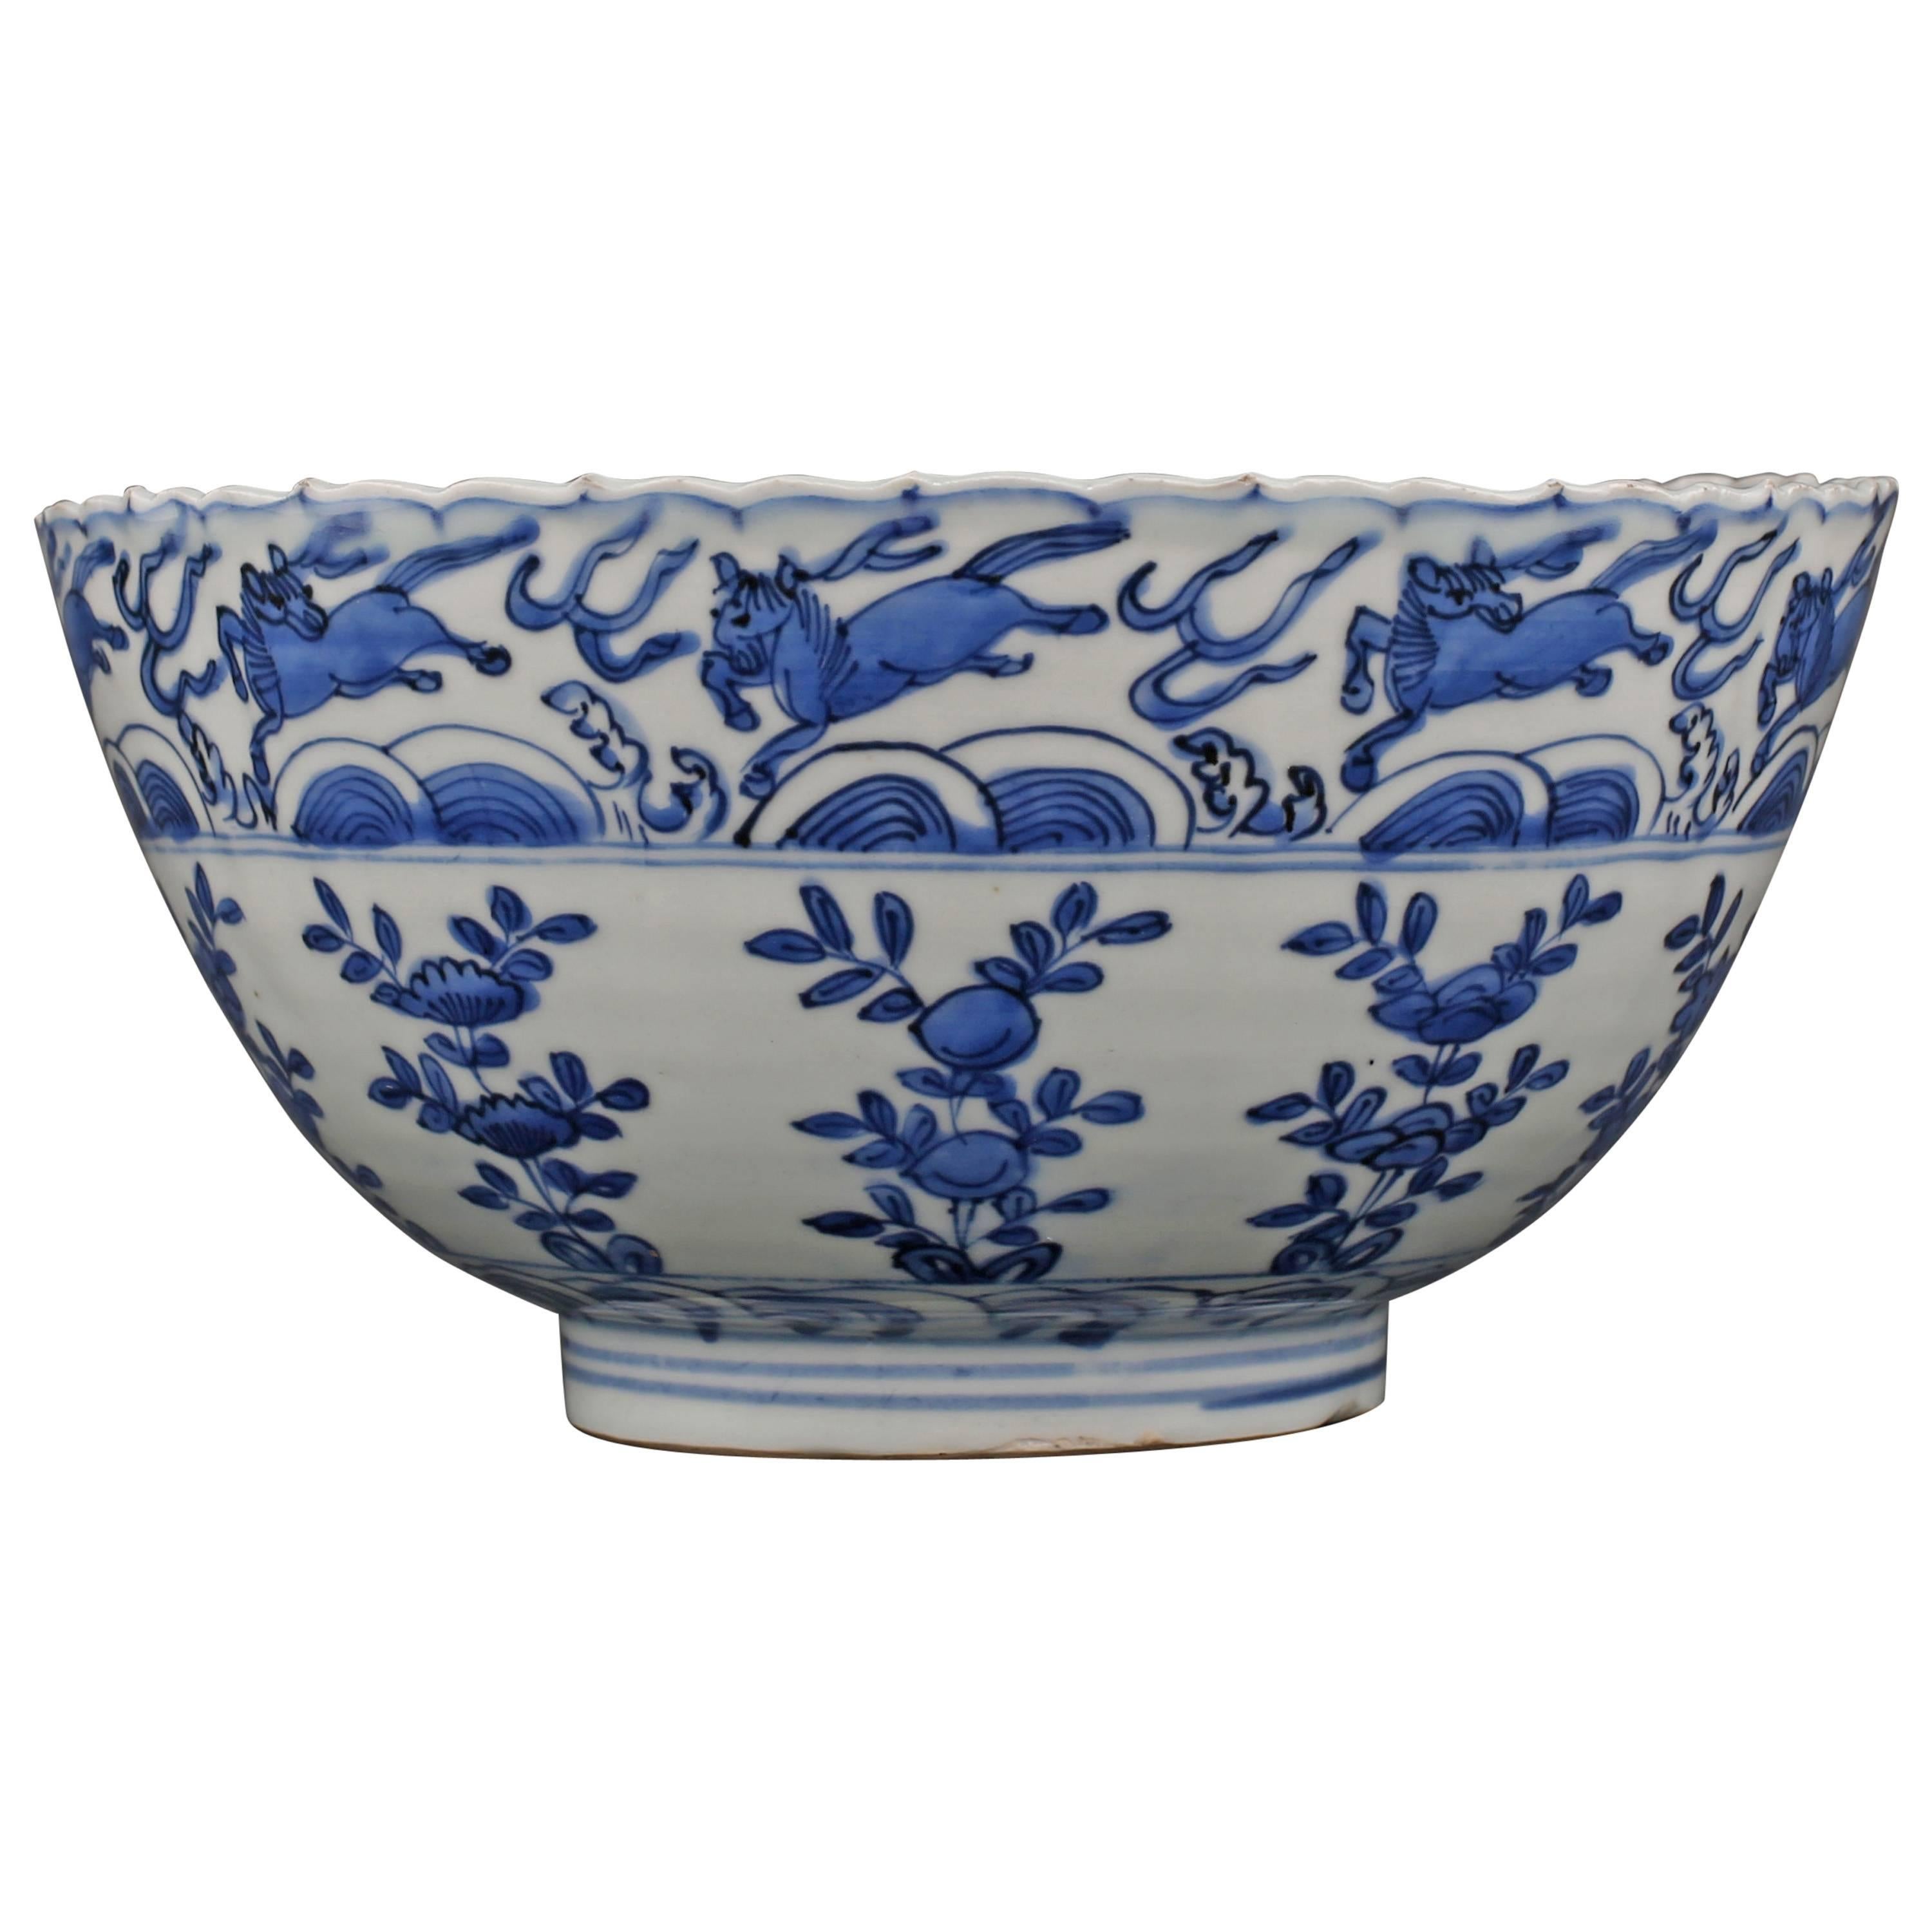 Chinese Ming Porcelain Blue and White Bowl, 16th Century